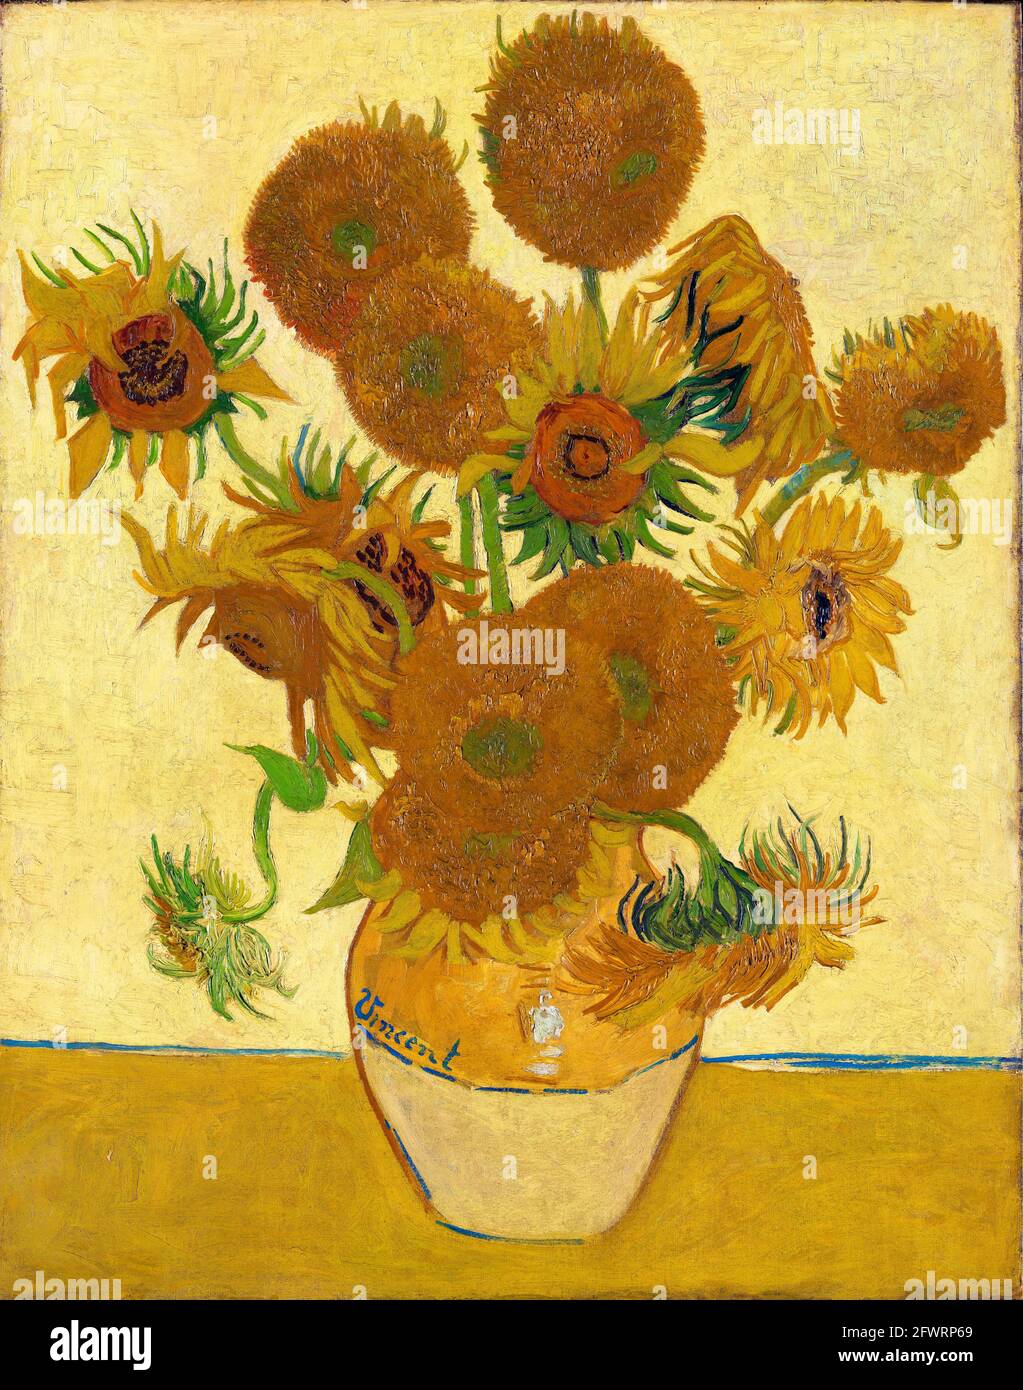 Sunflowers by Vincent van Gogh (1853-1890), oil on canvas, 1888 Stock Photo